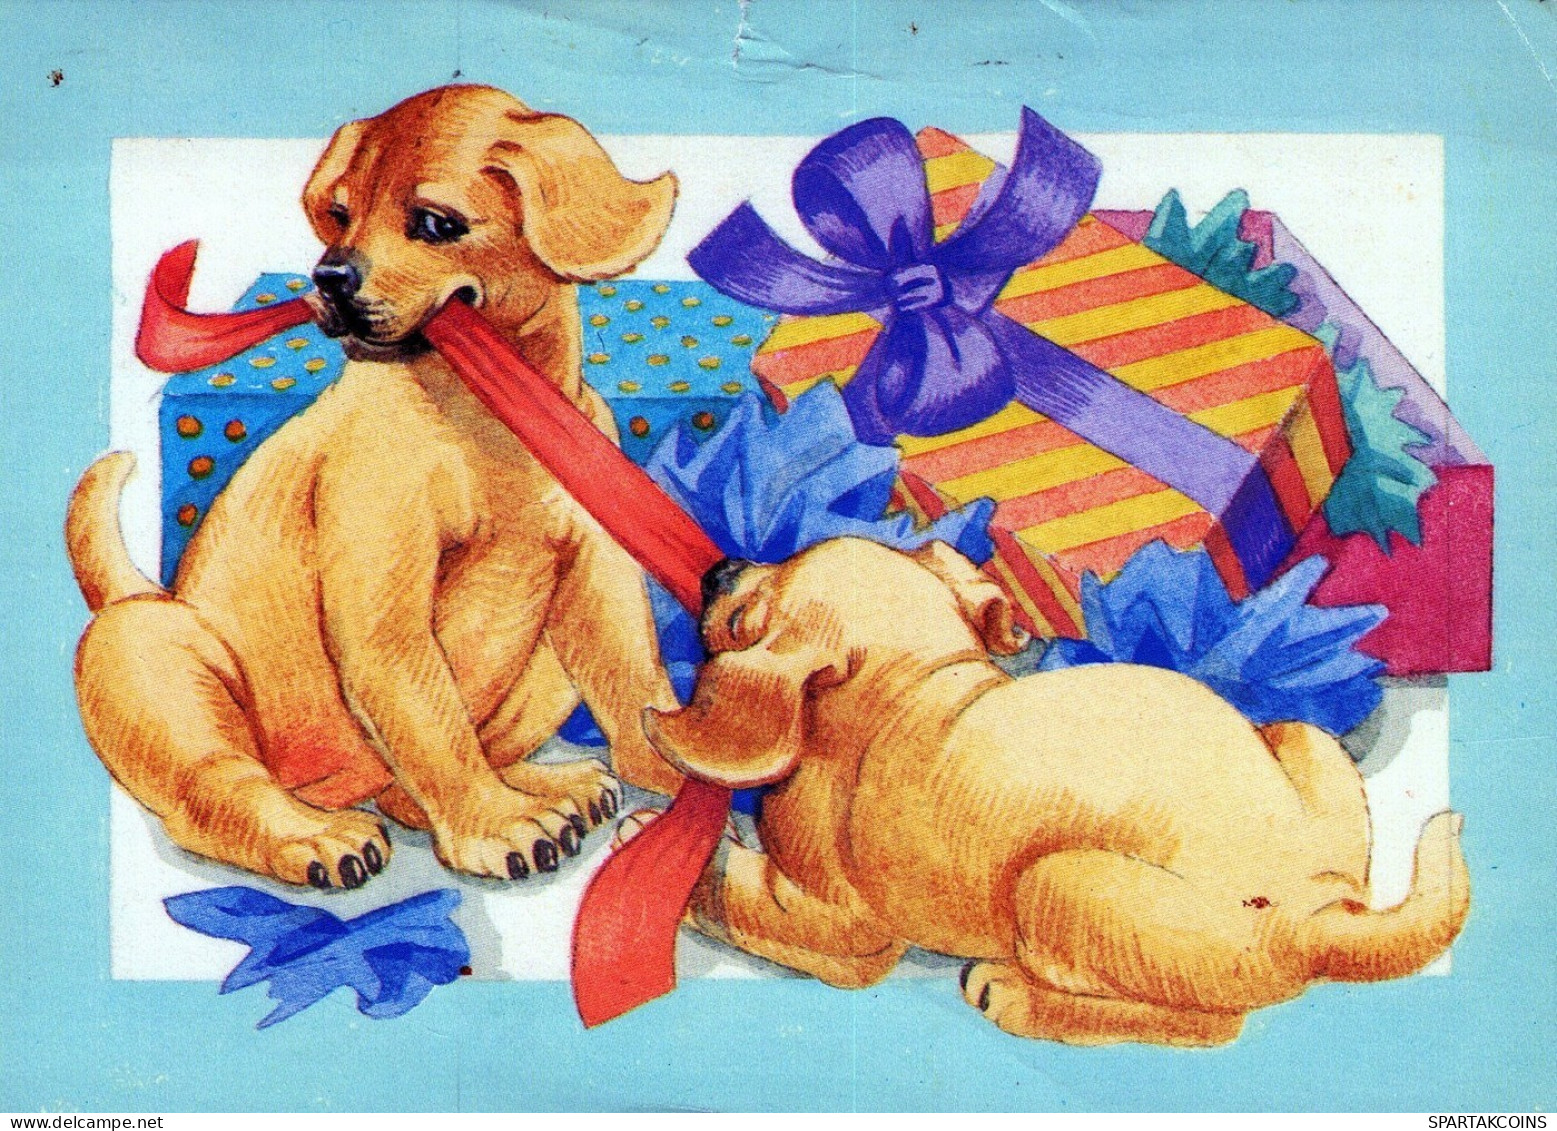 CANE Animale Vintage Cartolina CPSM #PAN664.A - Perros